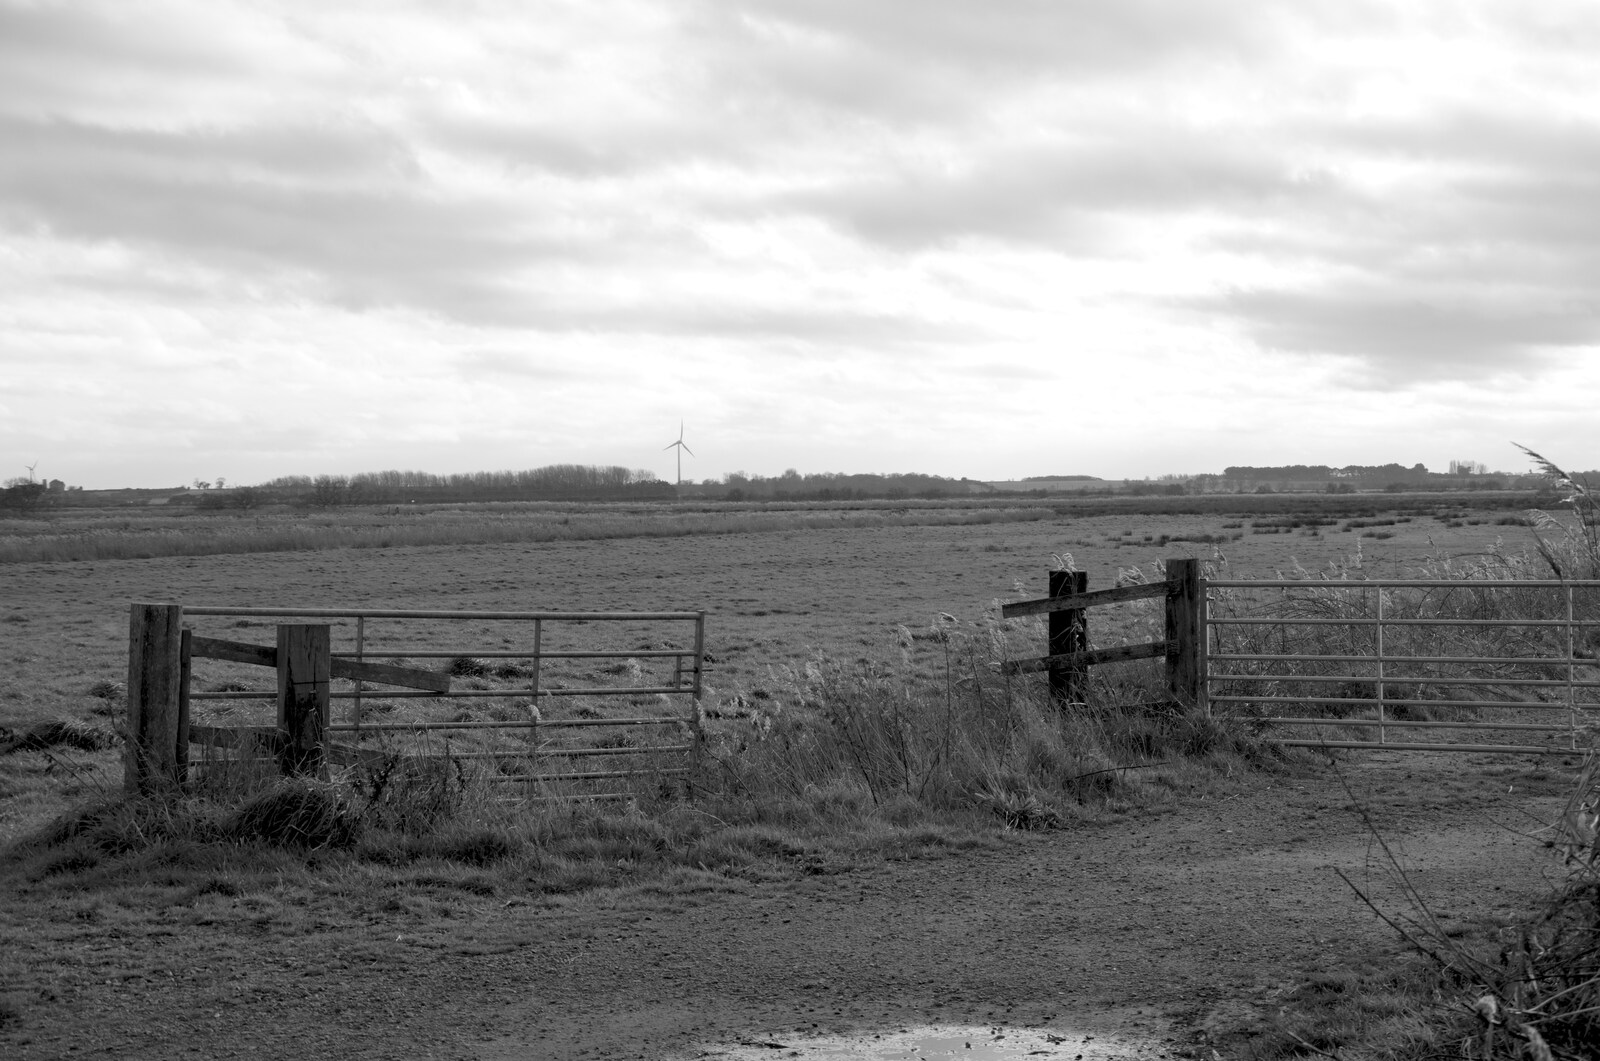 The wilds of north-east Norfolk from To See the Seals, Horsey Gap, Norfolk - 10th January 2020